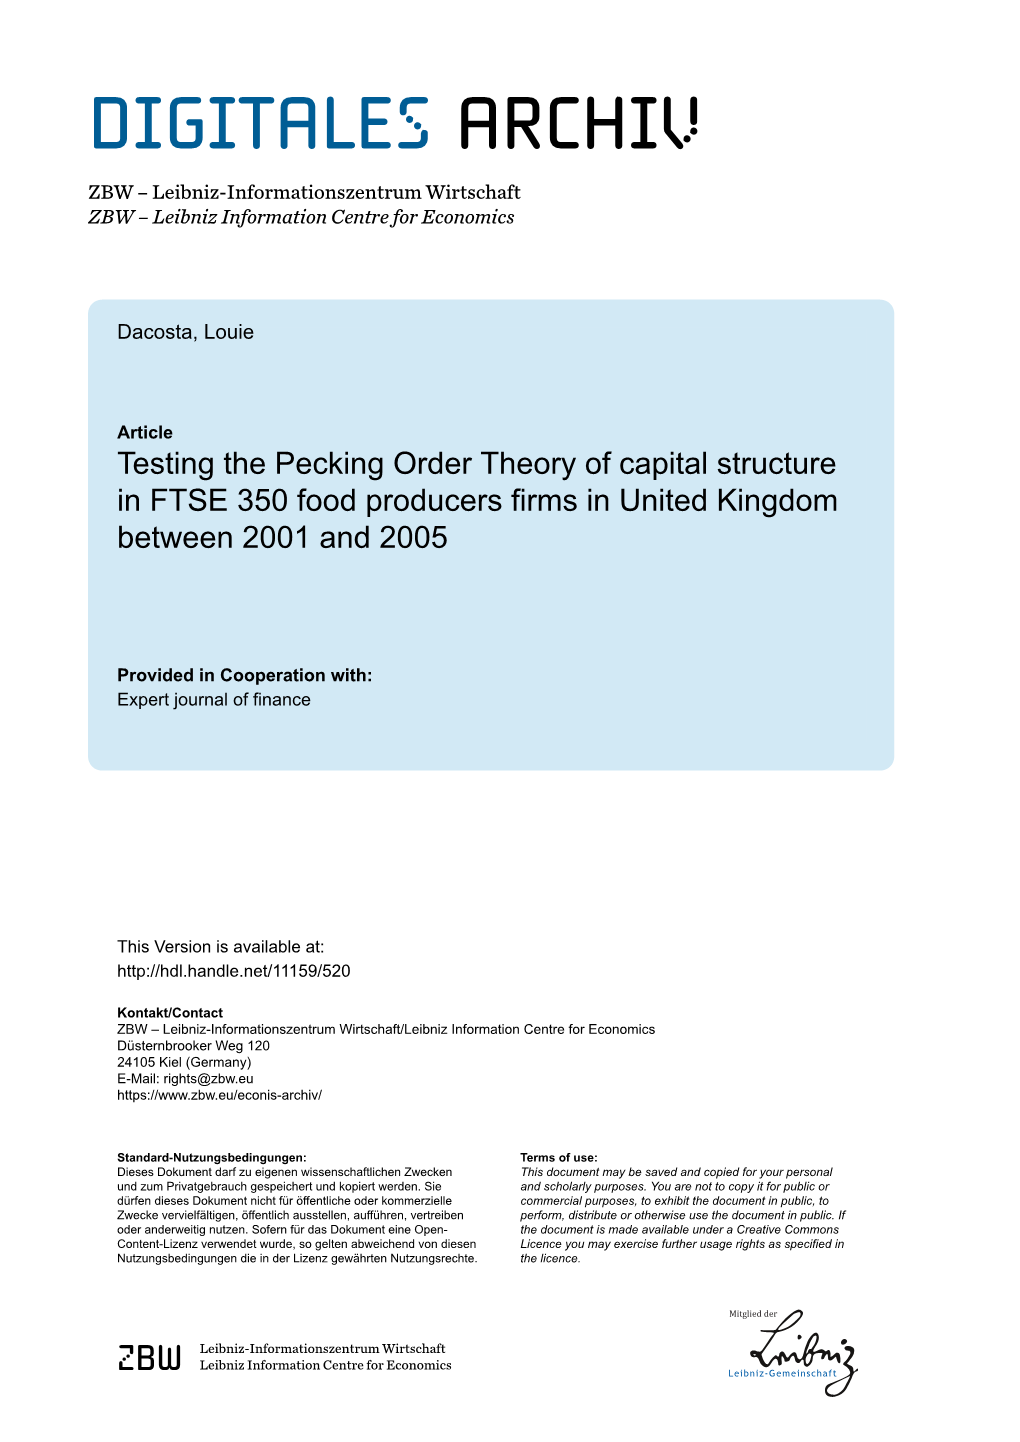 Testing the Pecking Order Theory of Capital Structure in FTSE 350 Food Producers Firms in United Kingdom Between 2001 and 2005